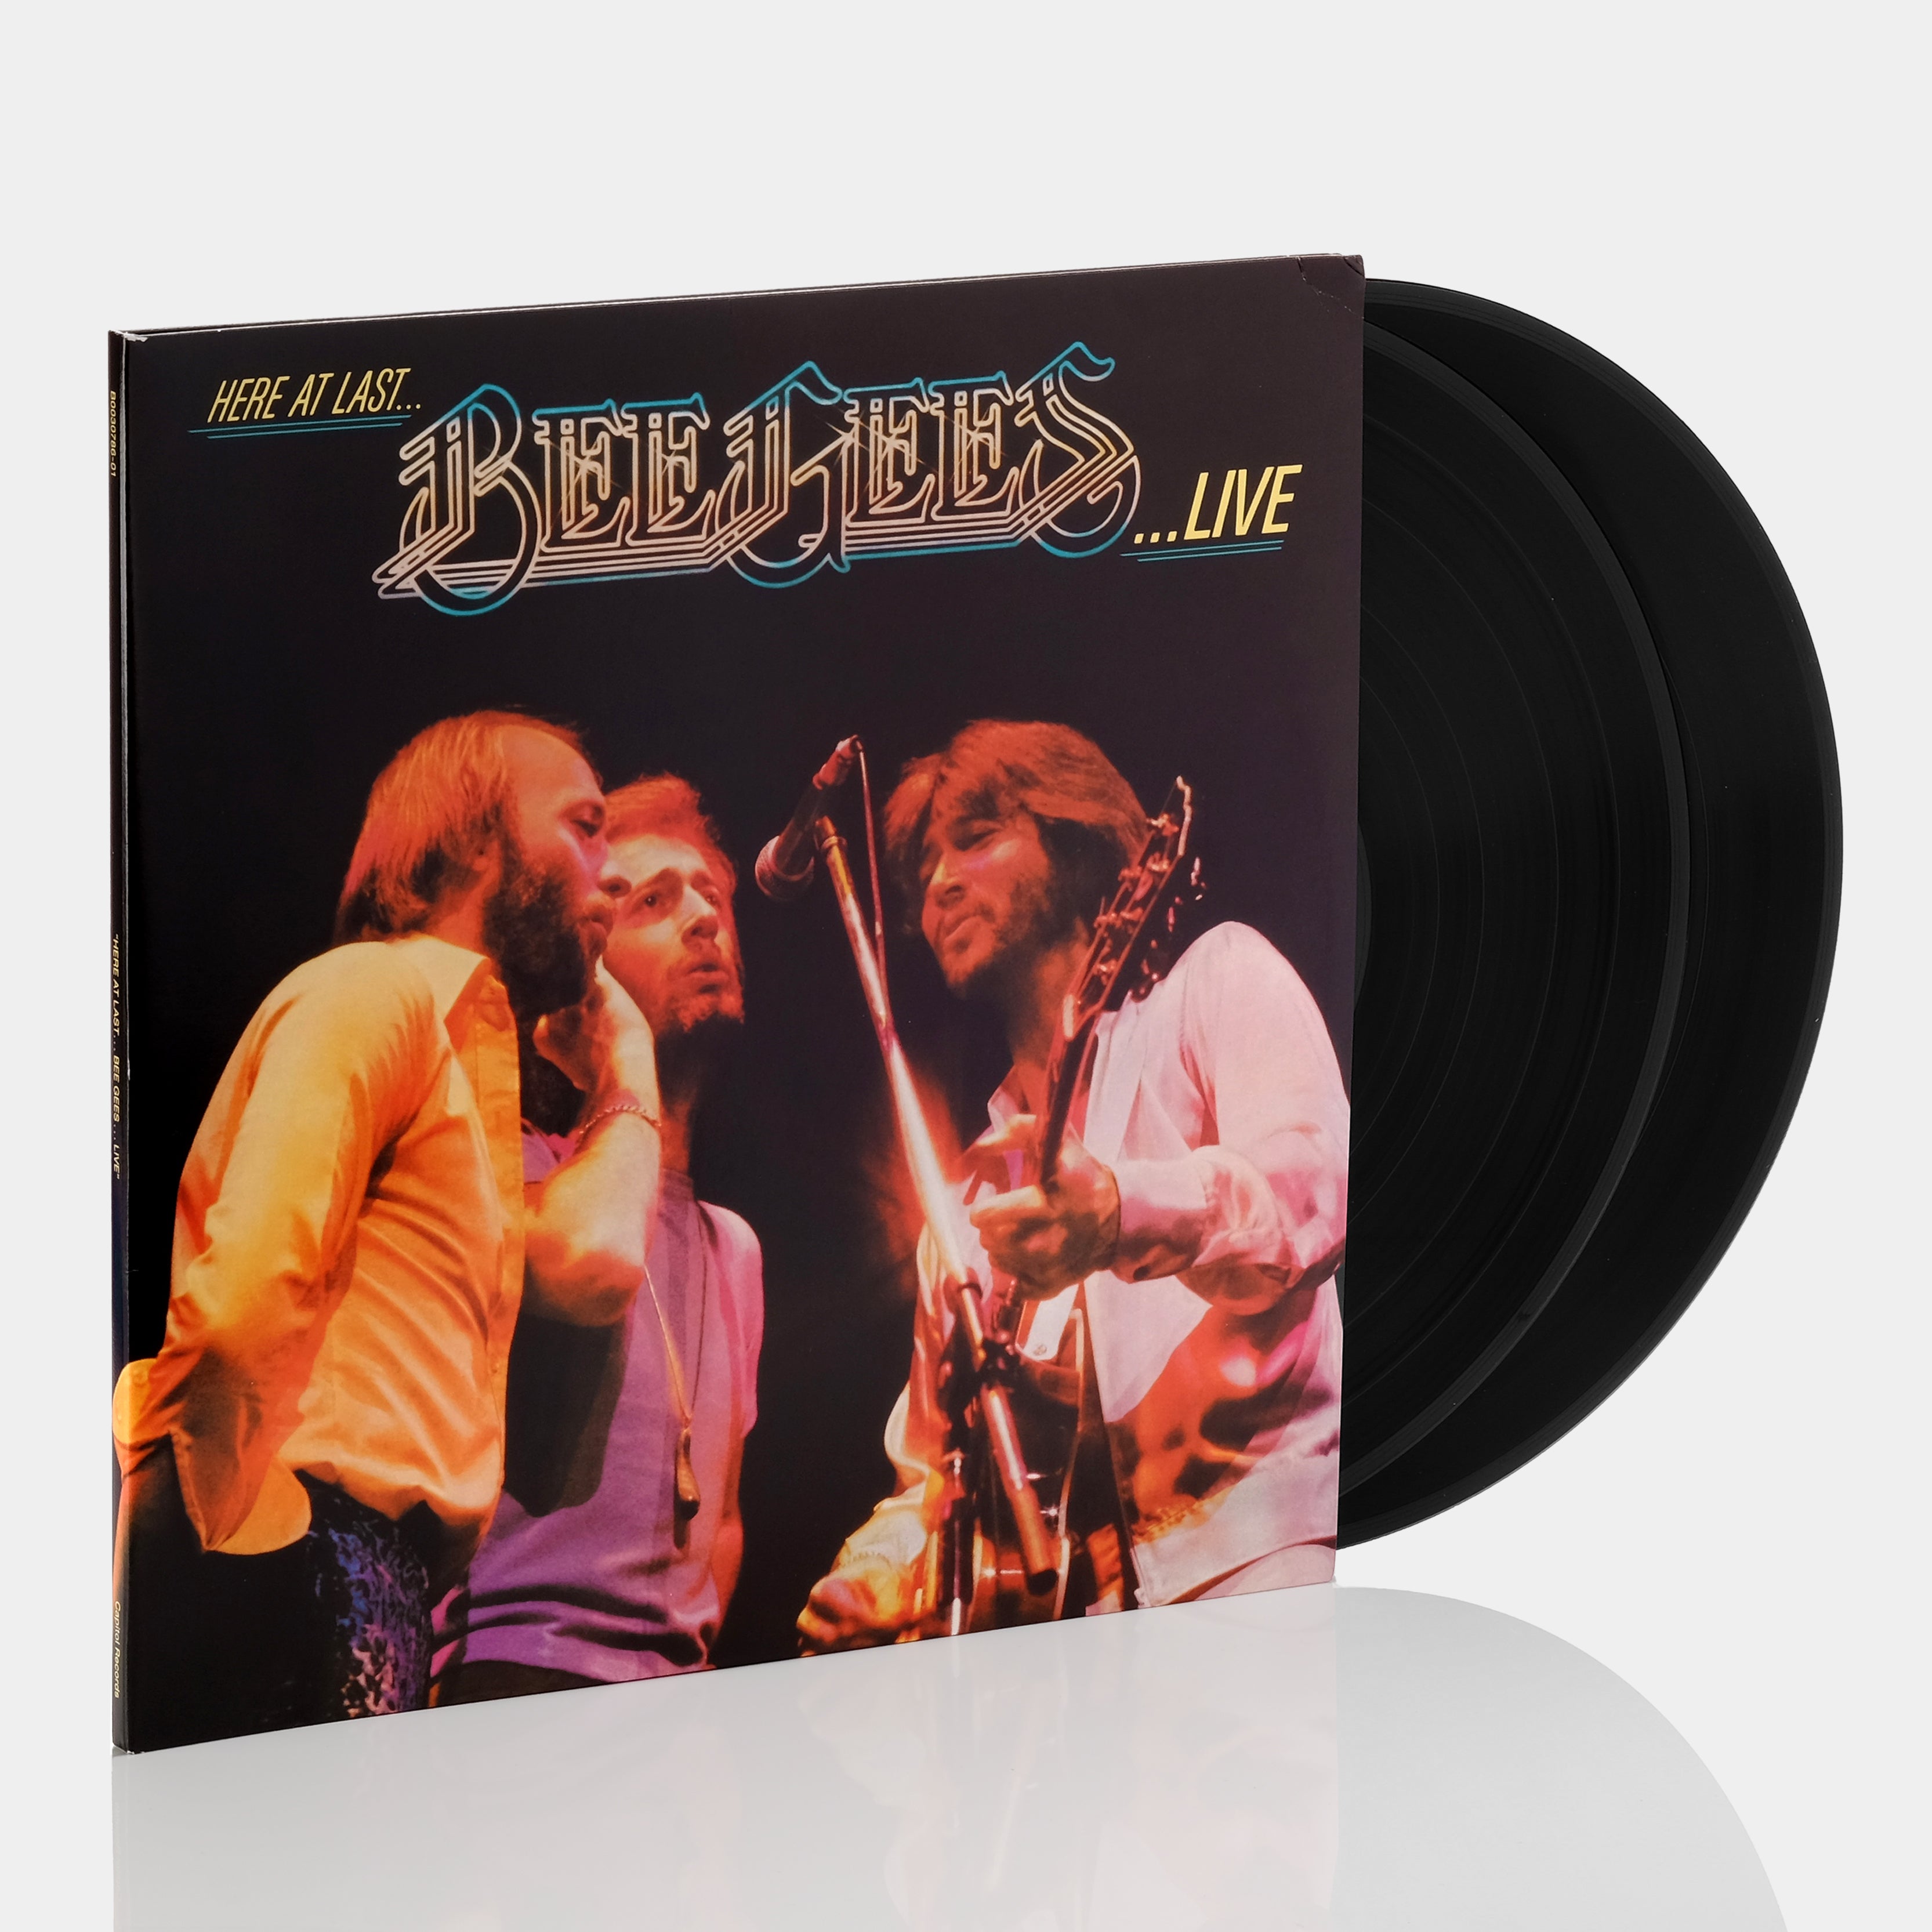 Bee Gees - Here At Last... Bee Gees Live 2xLP Vinyl Record